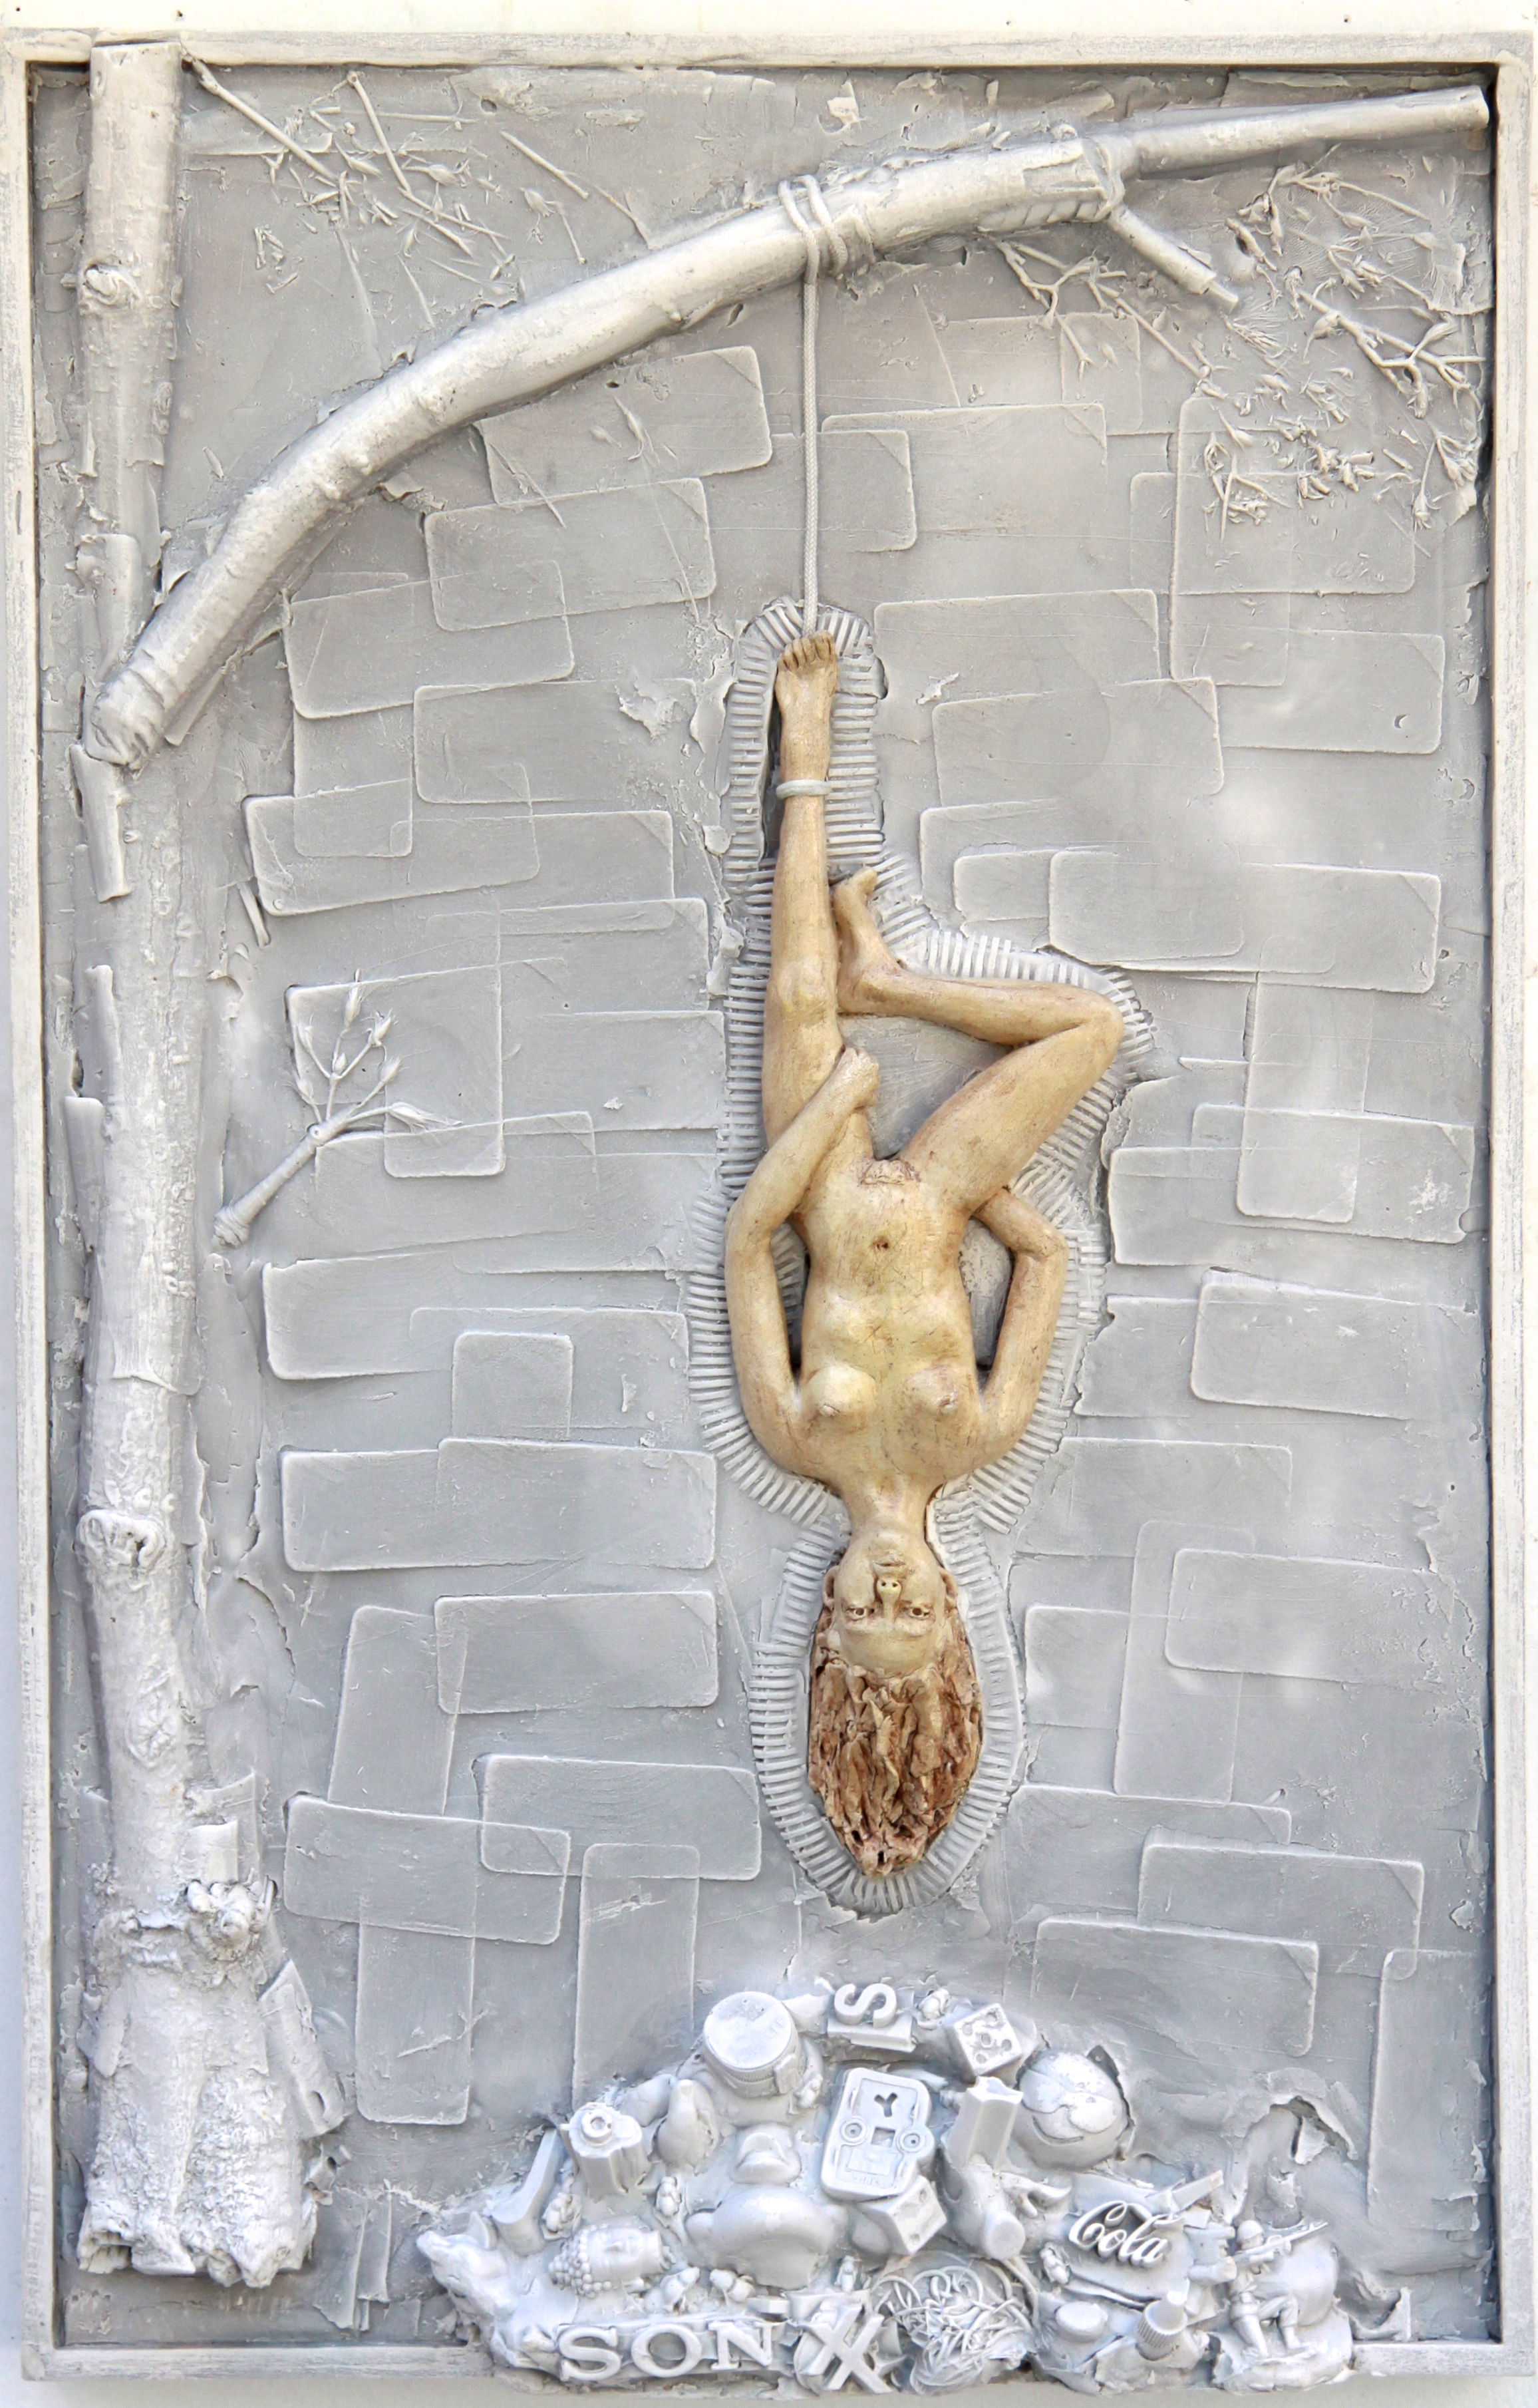    Hanged Man (Woman)   Carrara marble and hydrocal, 28"x18"x4" wall relief art, 2017 